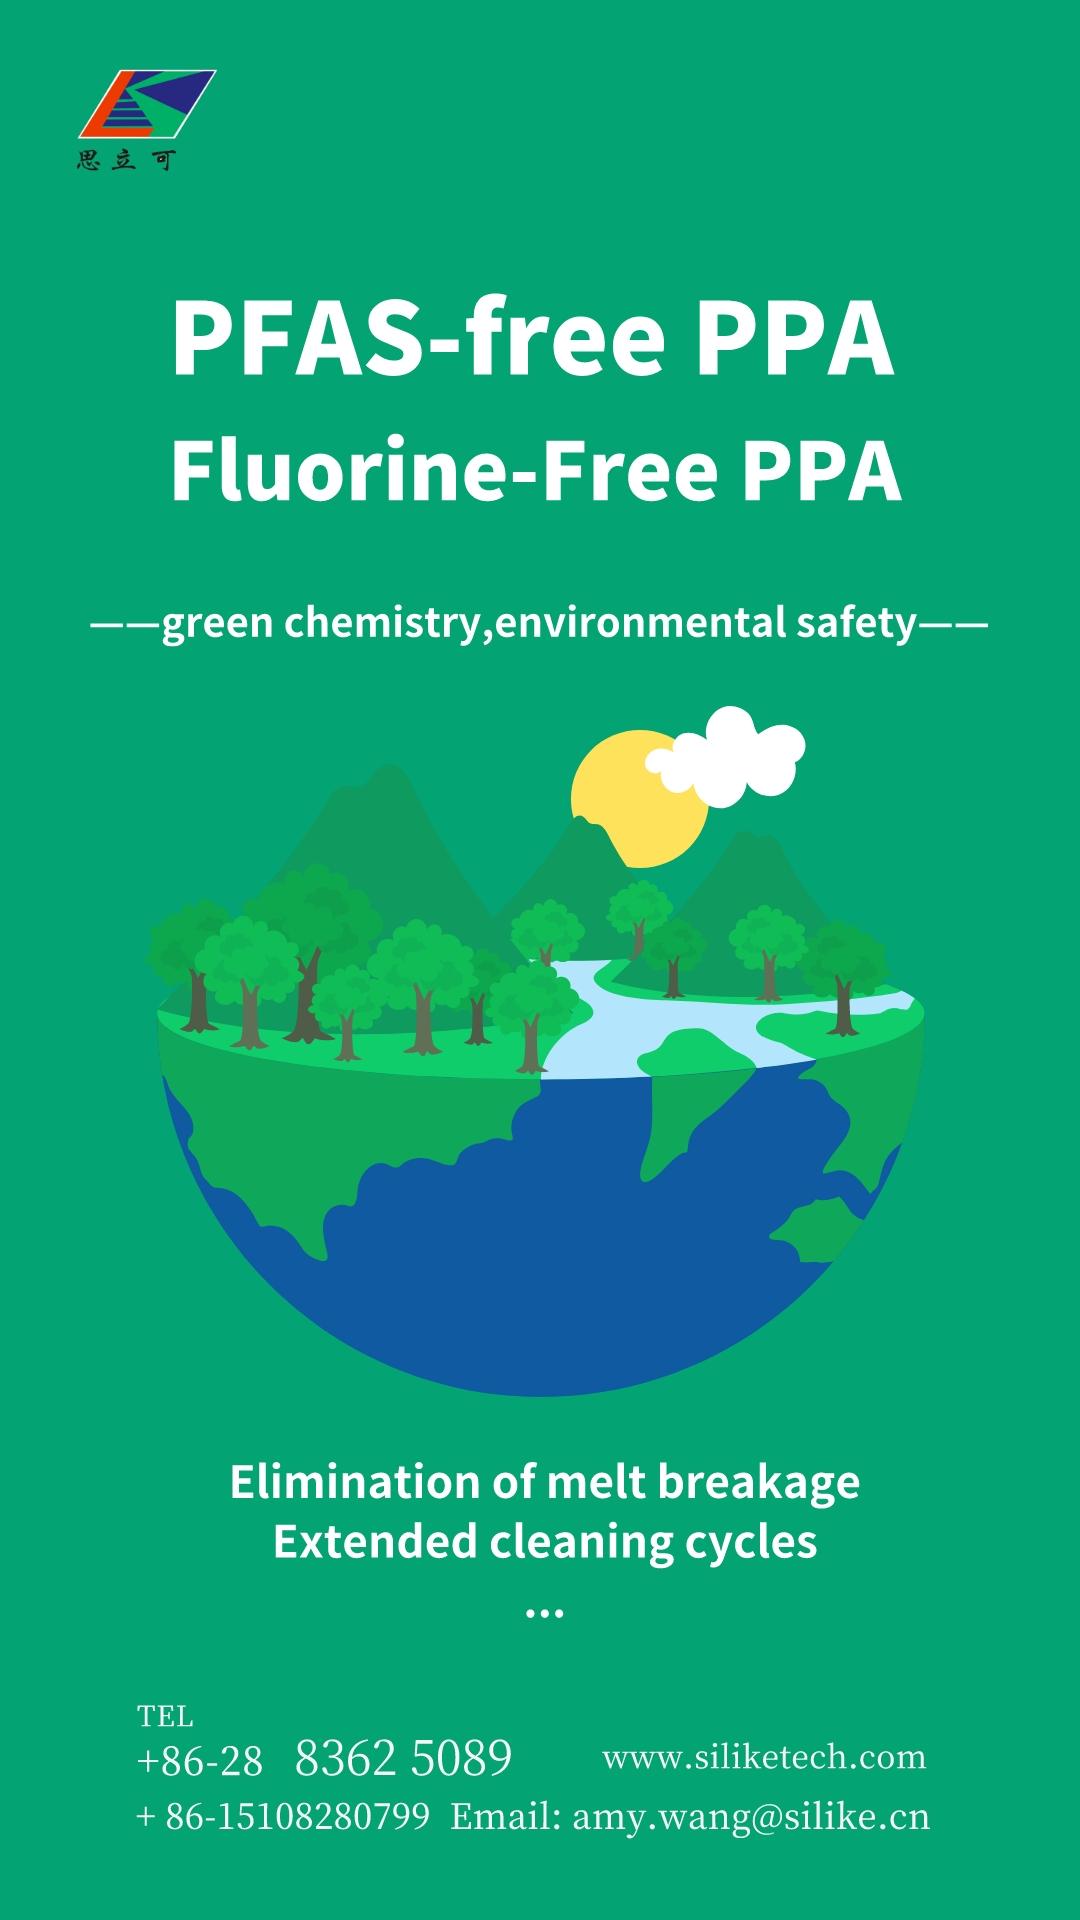 PFAS-free PPA Polymer Processing Aids – Why Use Them and What’s the Concern with PFAS?